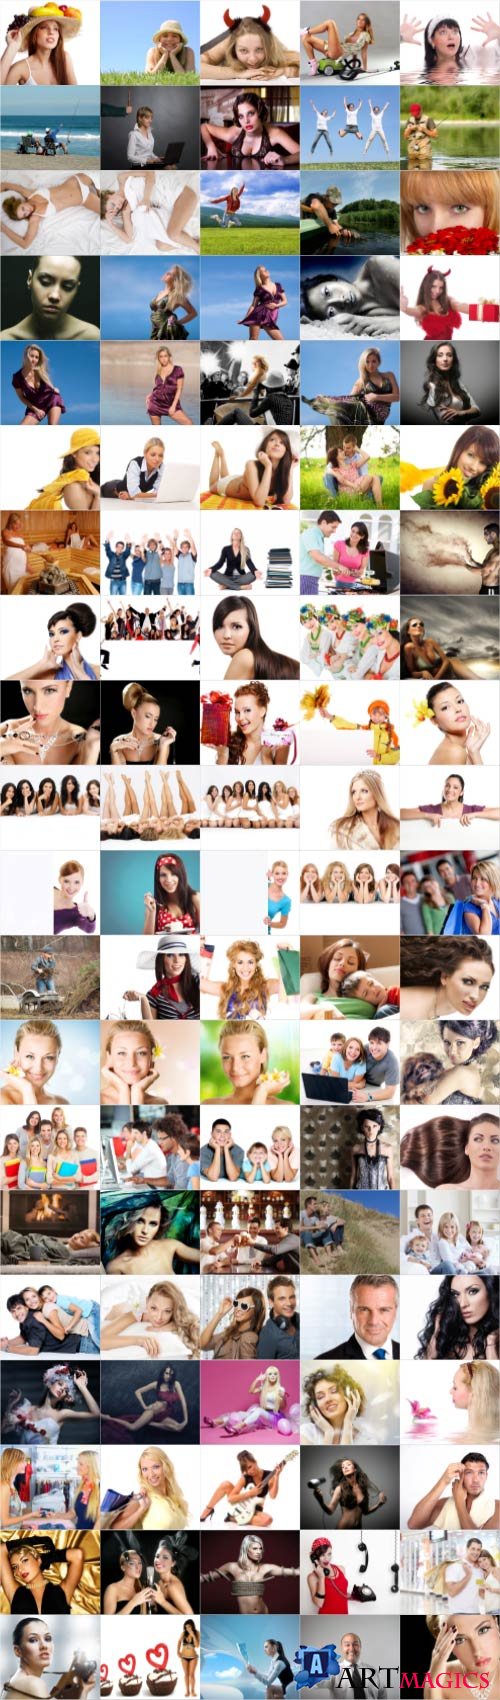 People large selection stock photos